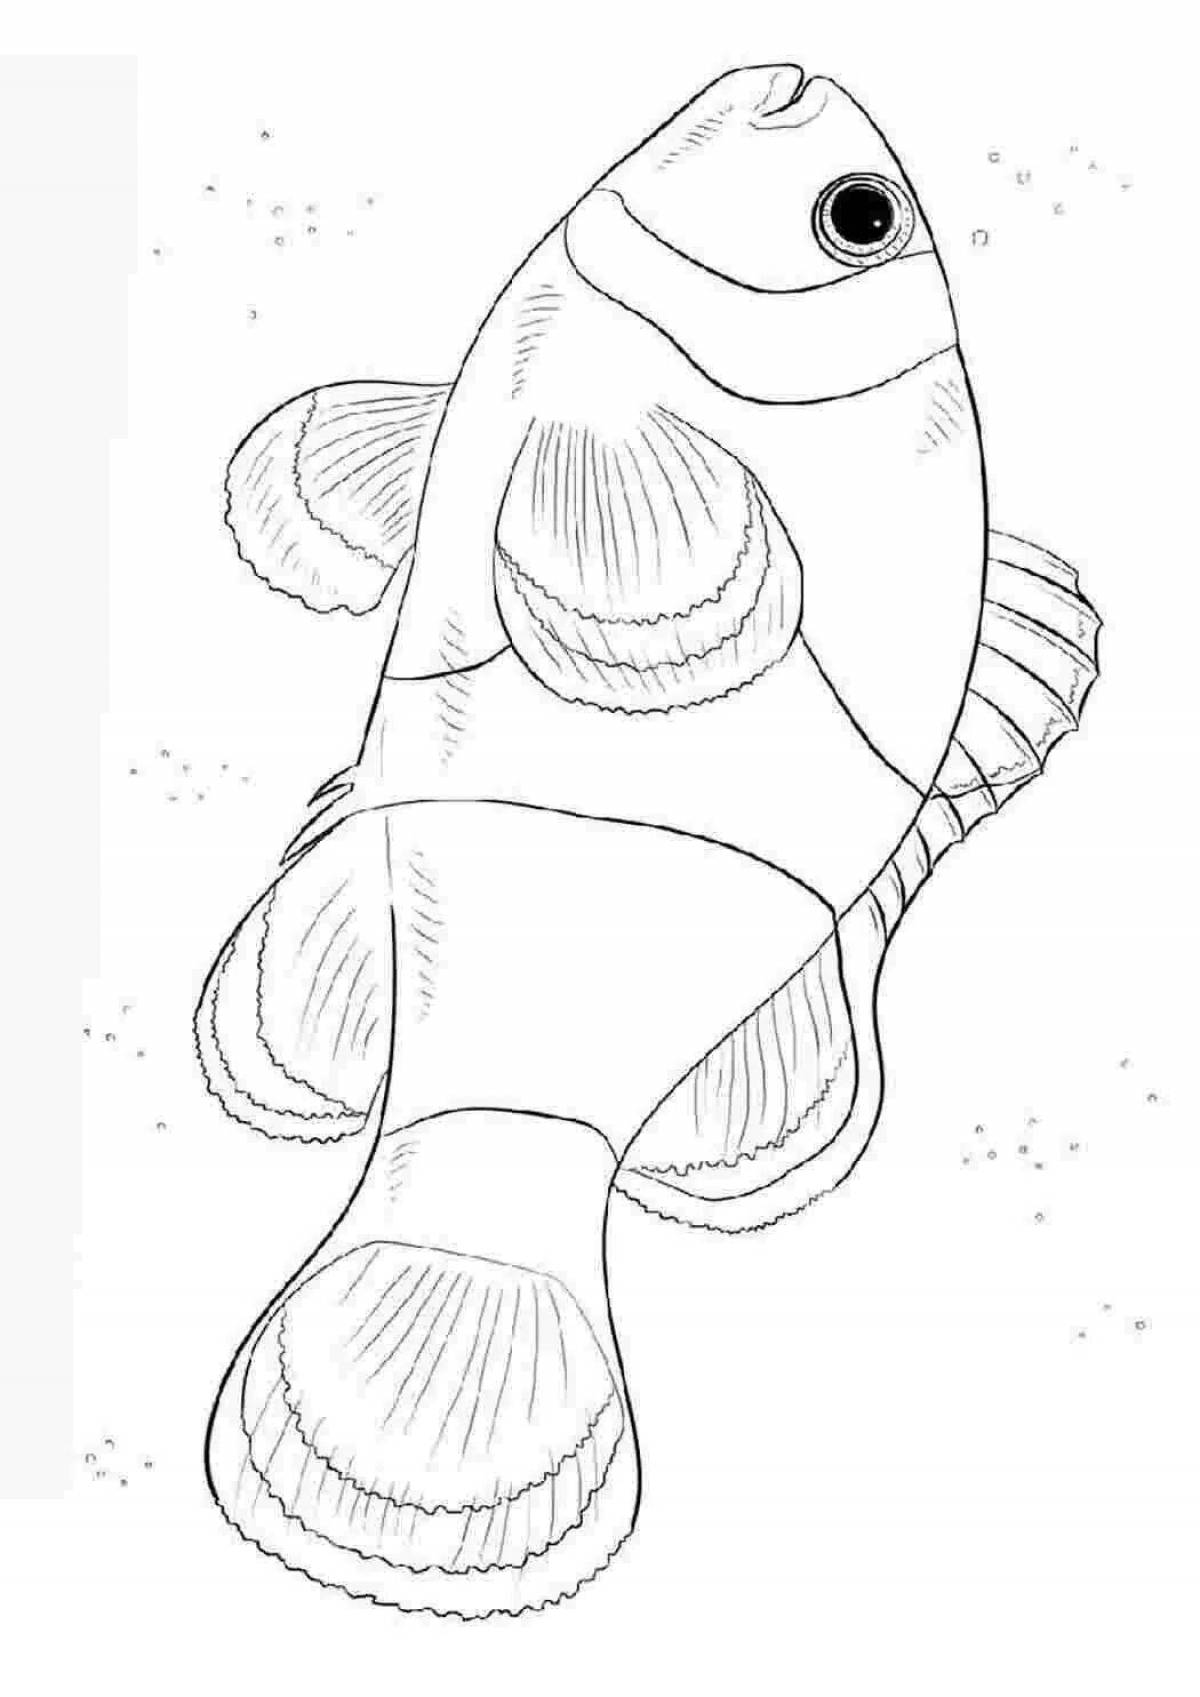 Large drawing of a clown fish